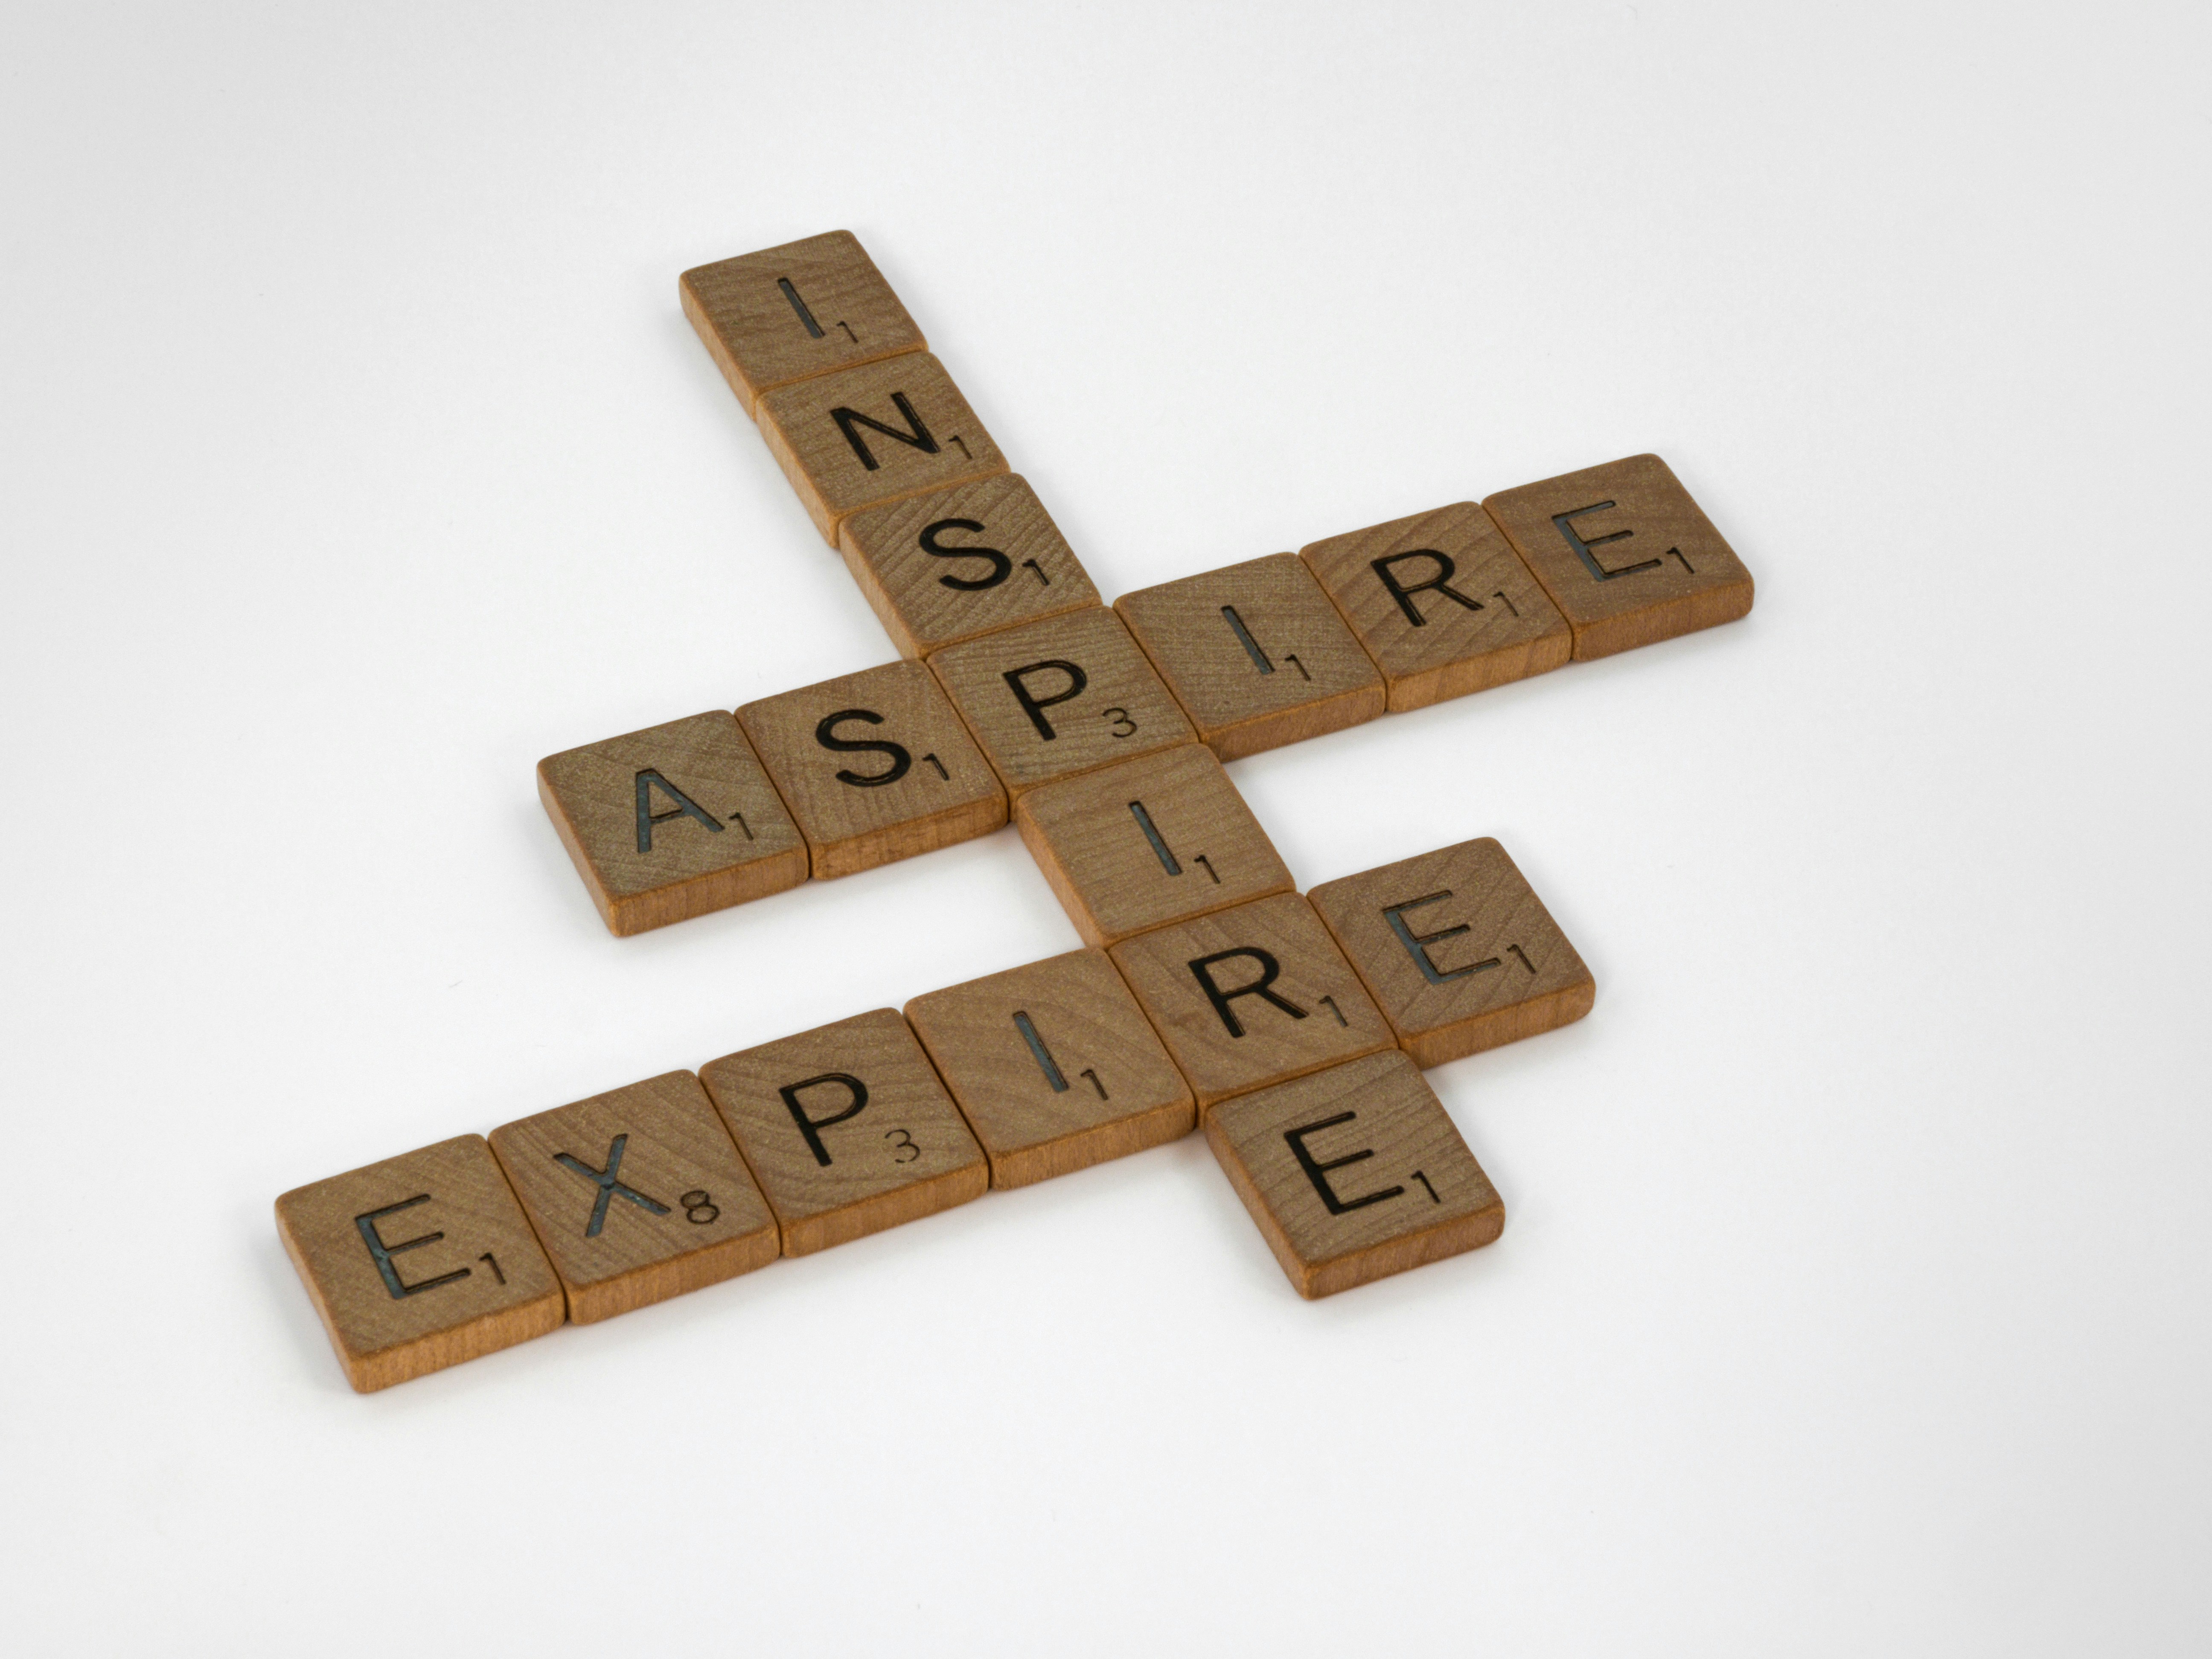 scrabble, scrabble pieces, lettering, letters, wood, scrabble tiles, white background, words, quote, letters, type, typography, design, layout, focus, bokeh, blur, photography, images, image, aspire, inspire, expire, inspiration, teaching, life cycle, teacher, life coach, life,